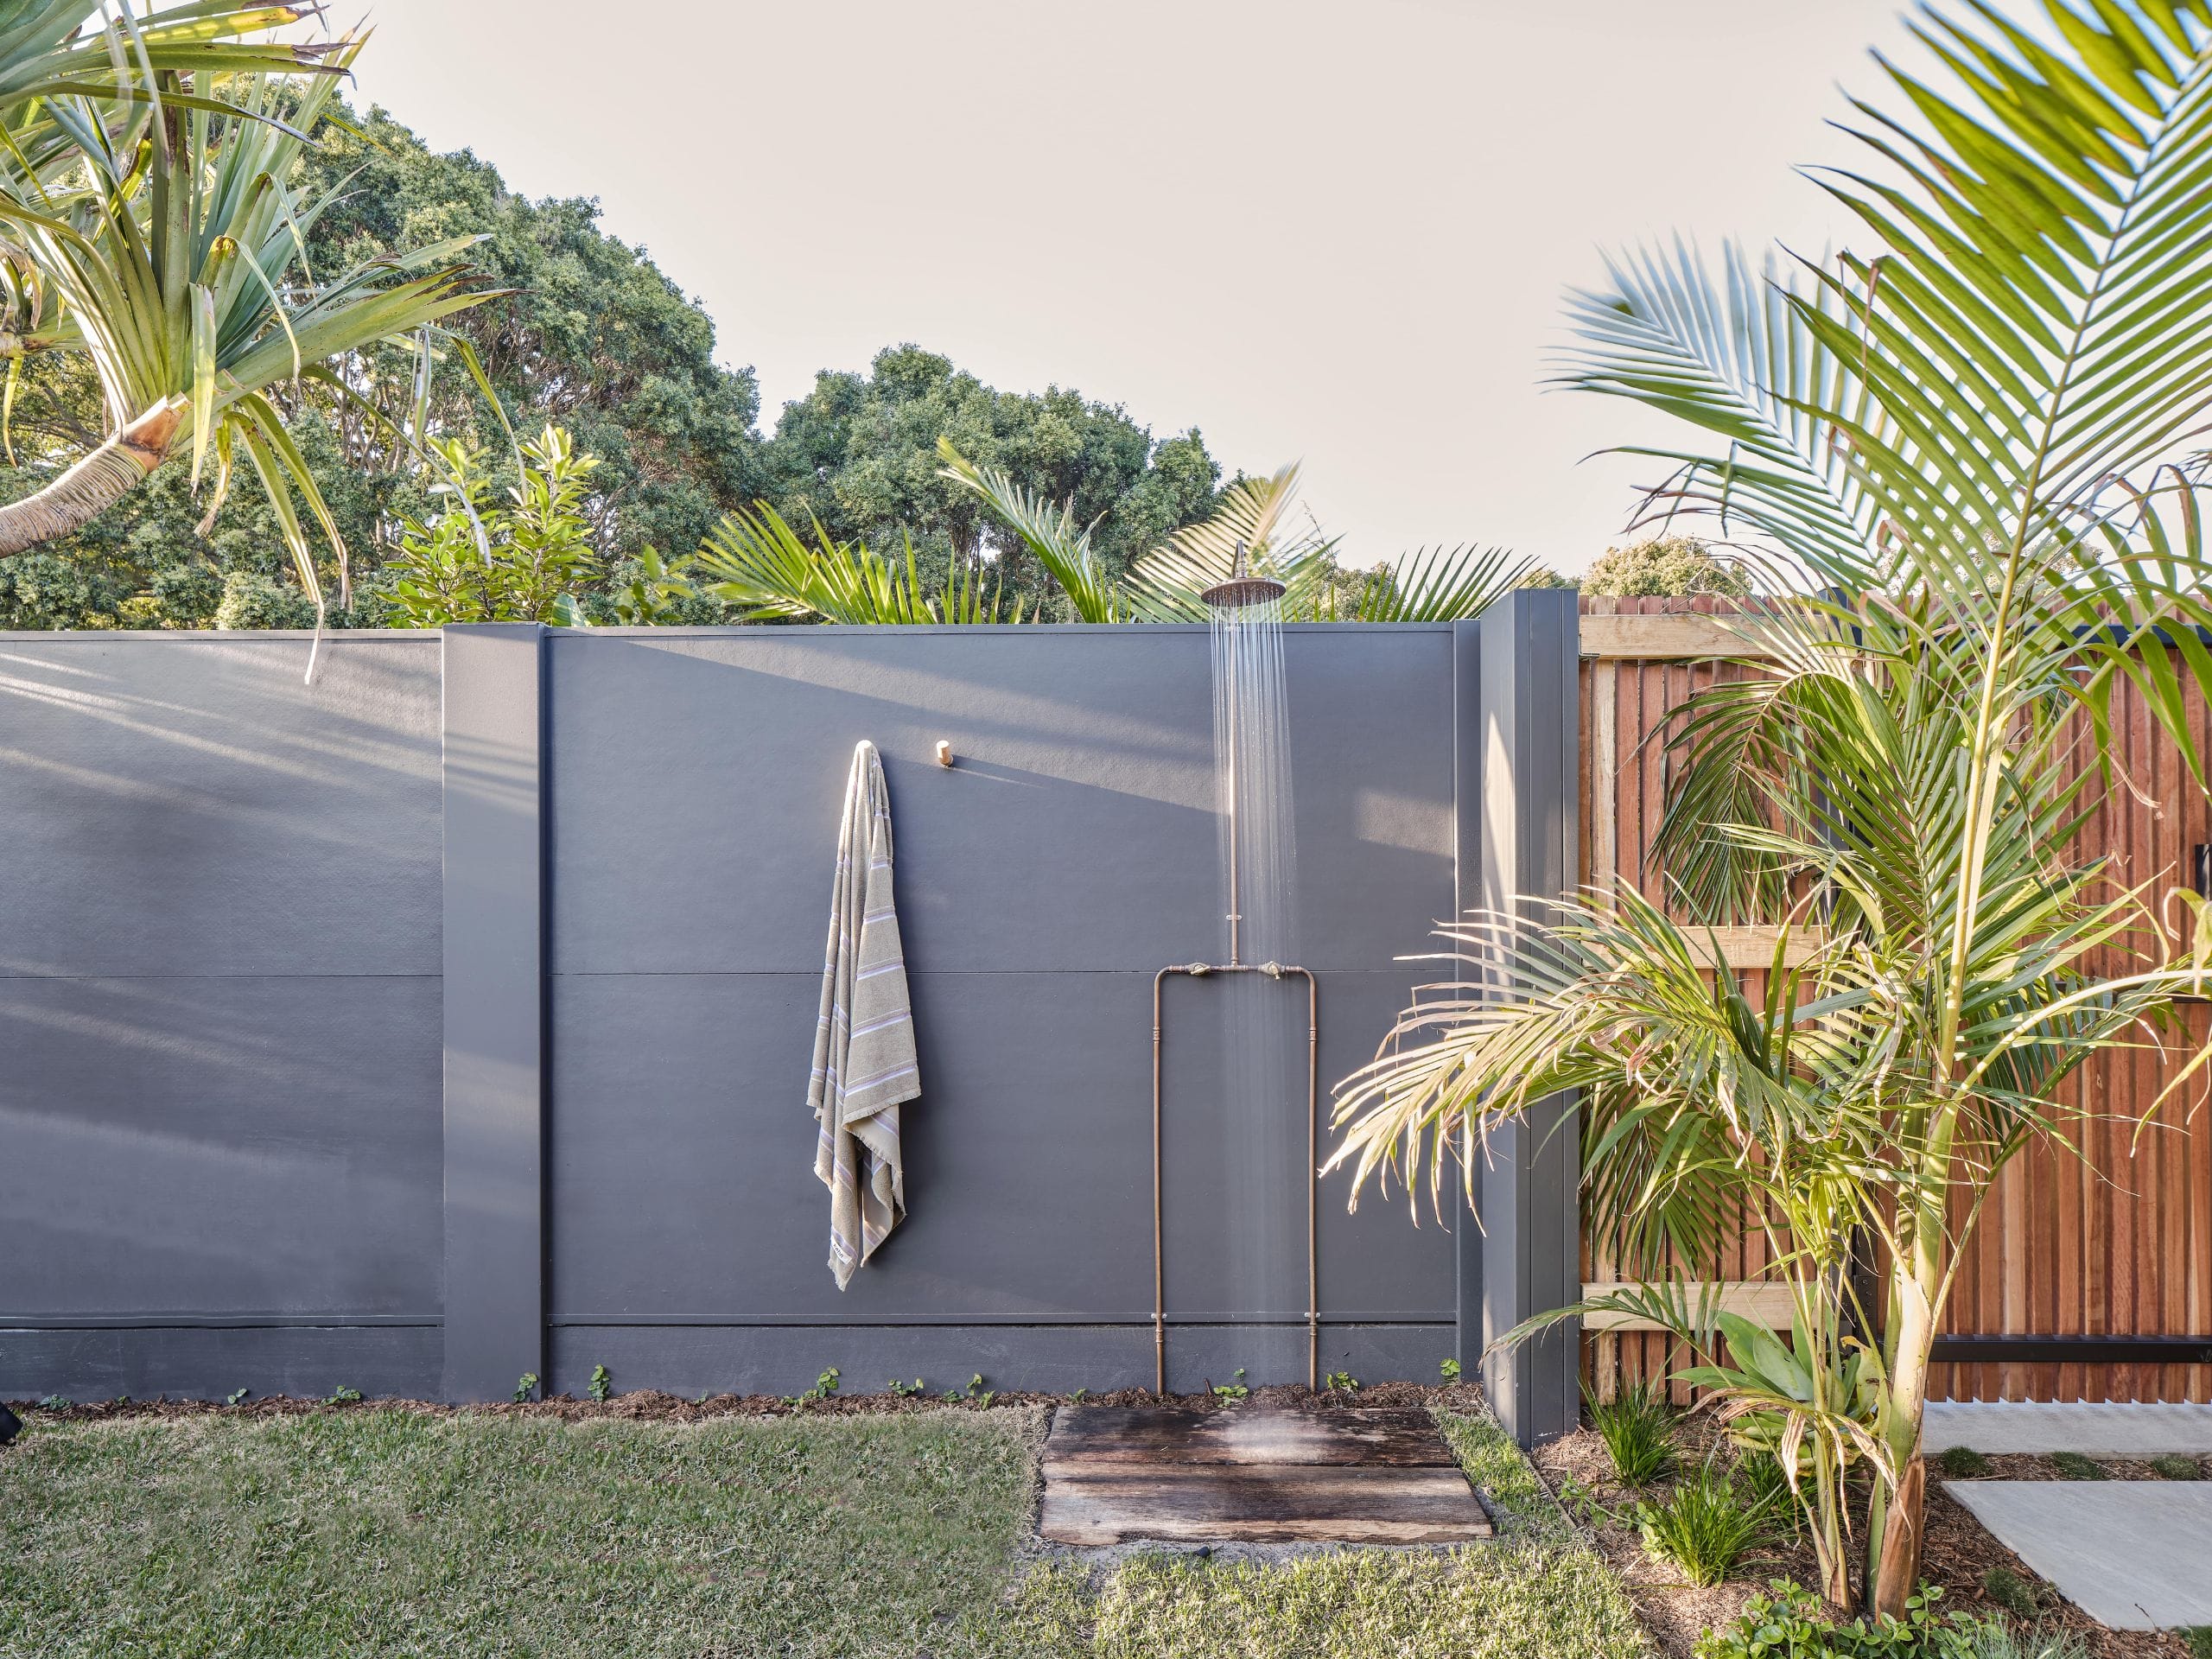 Outdoor showers are ideal for warm humid climates